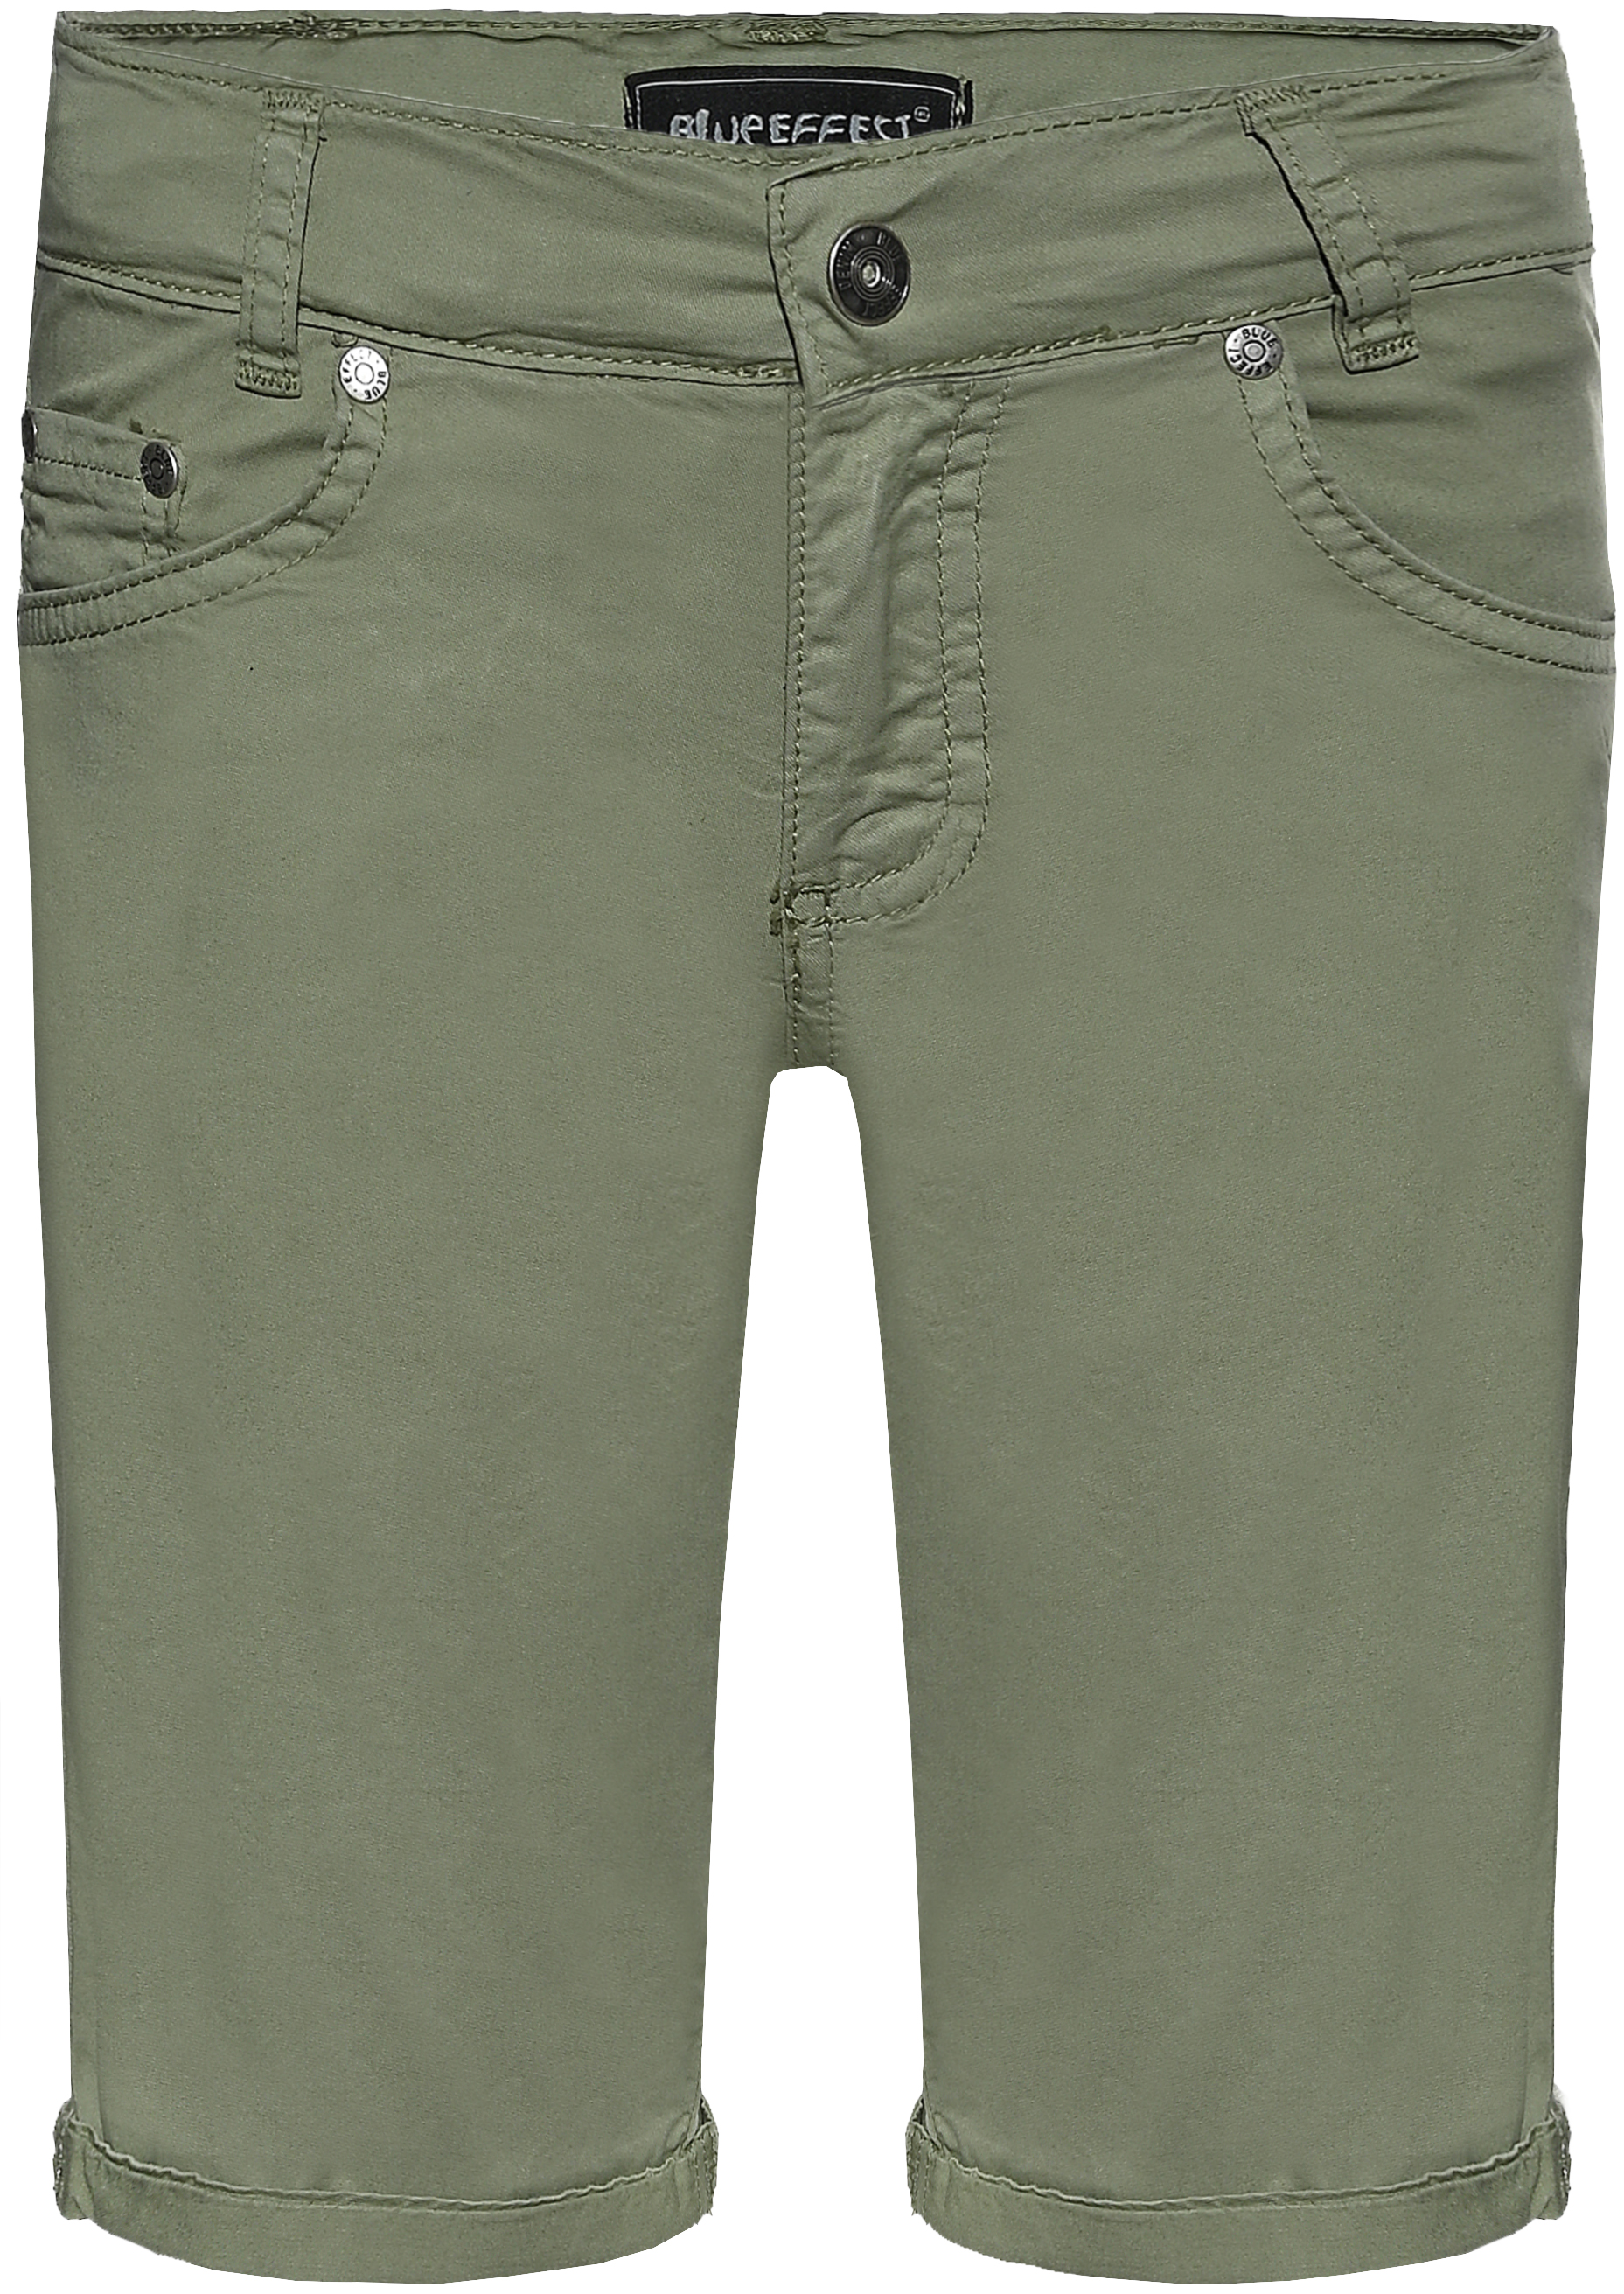 4273-Boys Short available in slim, normal, wide